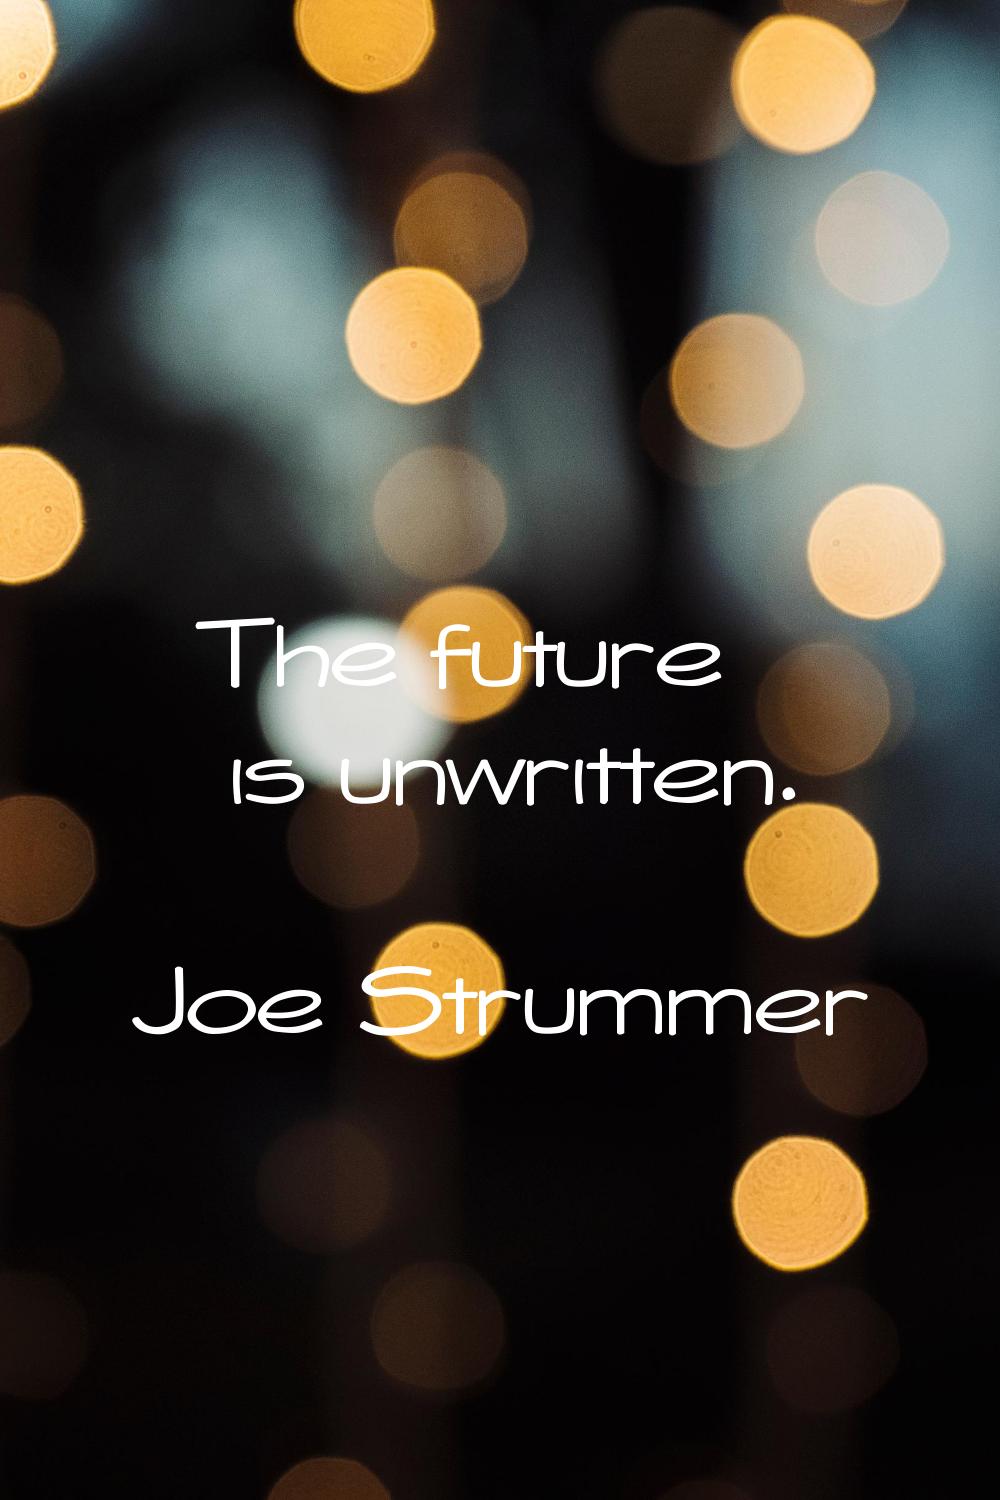 The future is unwritten.